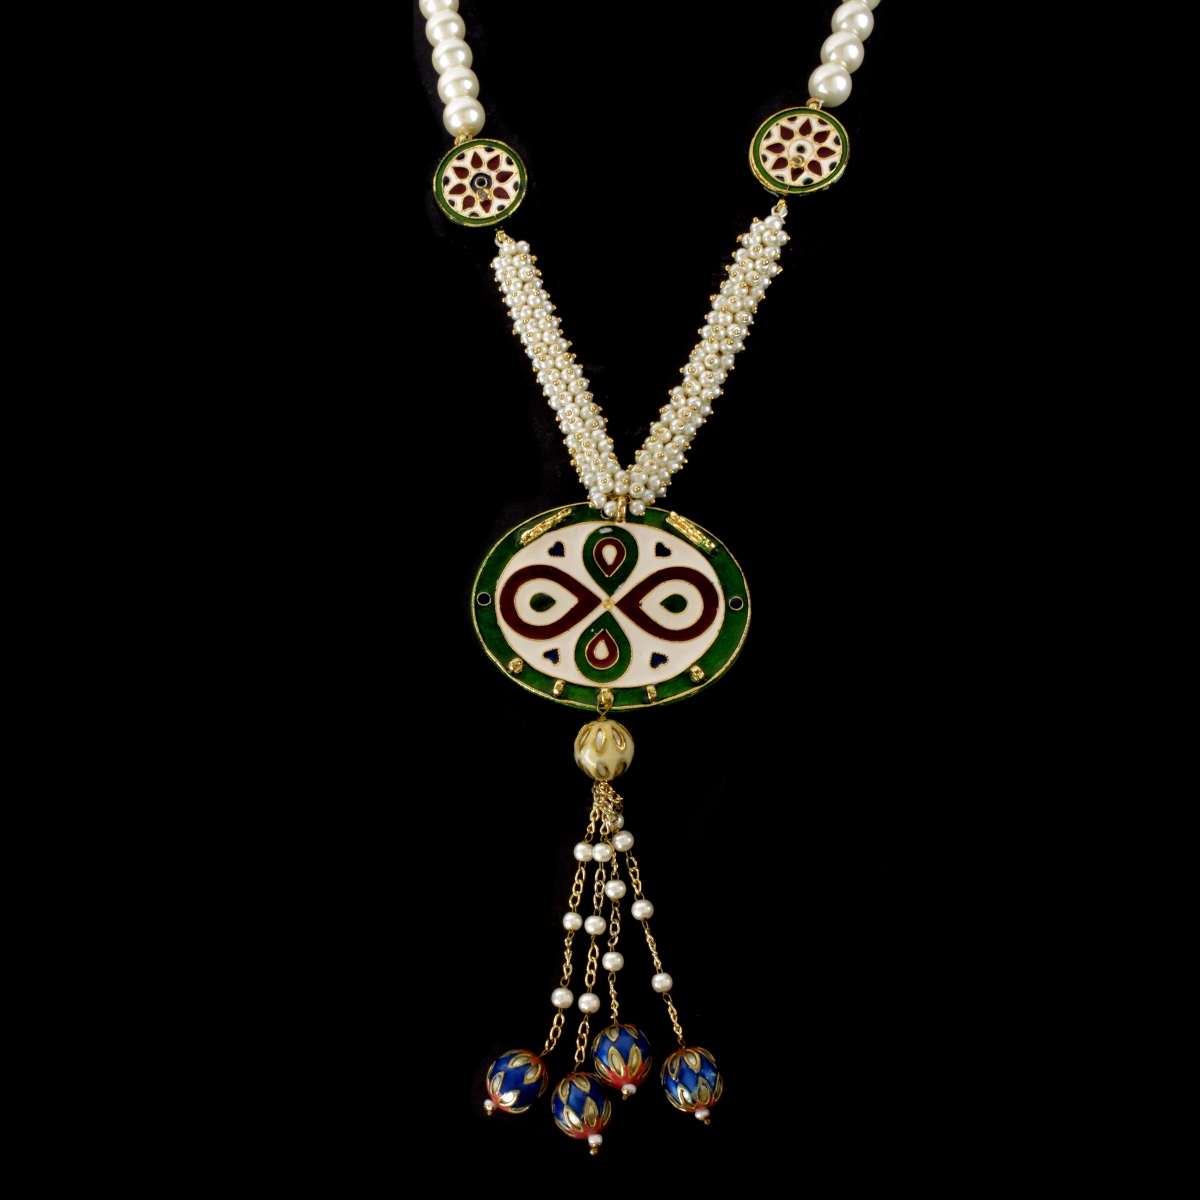 Costume Pearl and Enamel Necklace